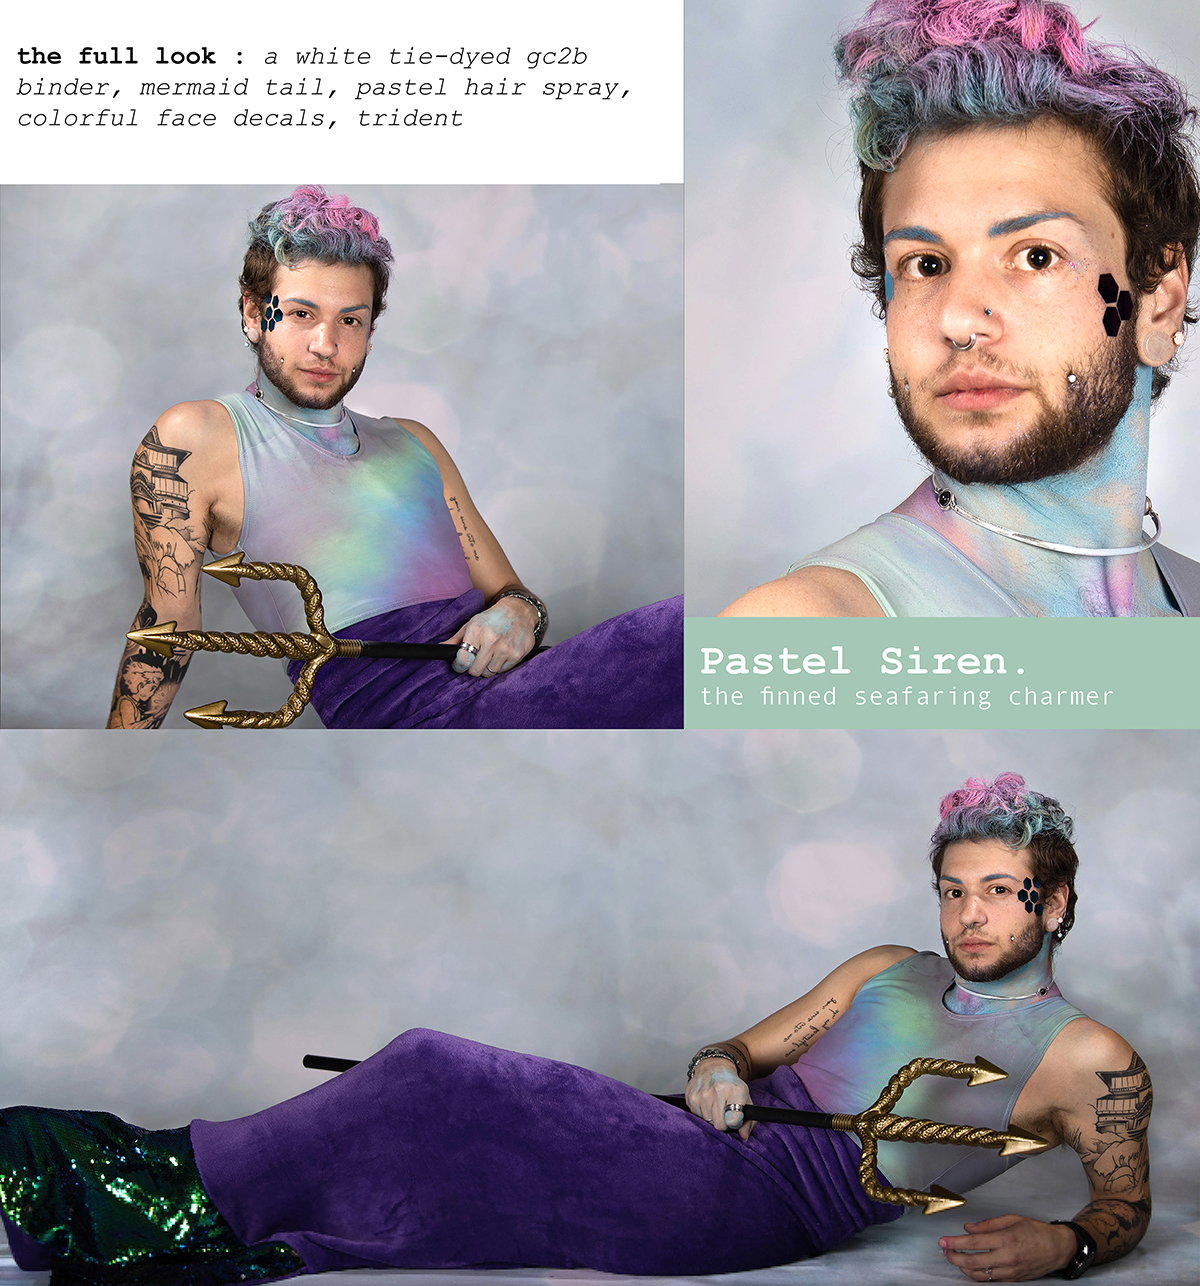 Pastel Siren. the finned seafaring charmer / the full look: A White Tie-Dyed gc2b binder, Mermaid Tail, Pastel Hair Spray, Colorful Face Decals, Trident